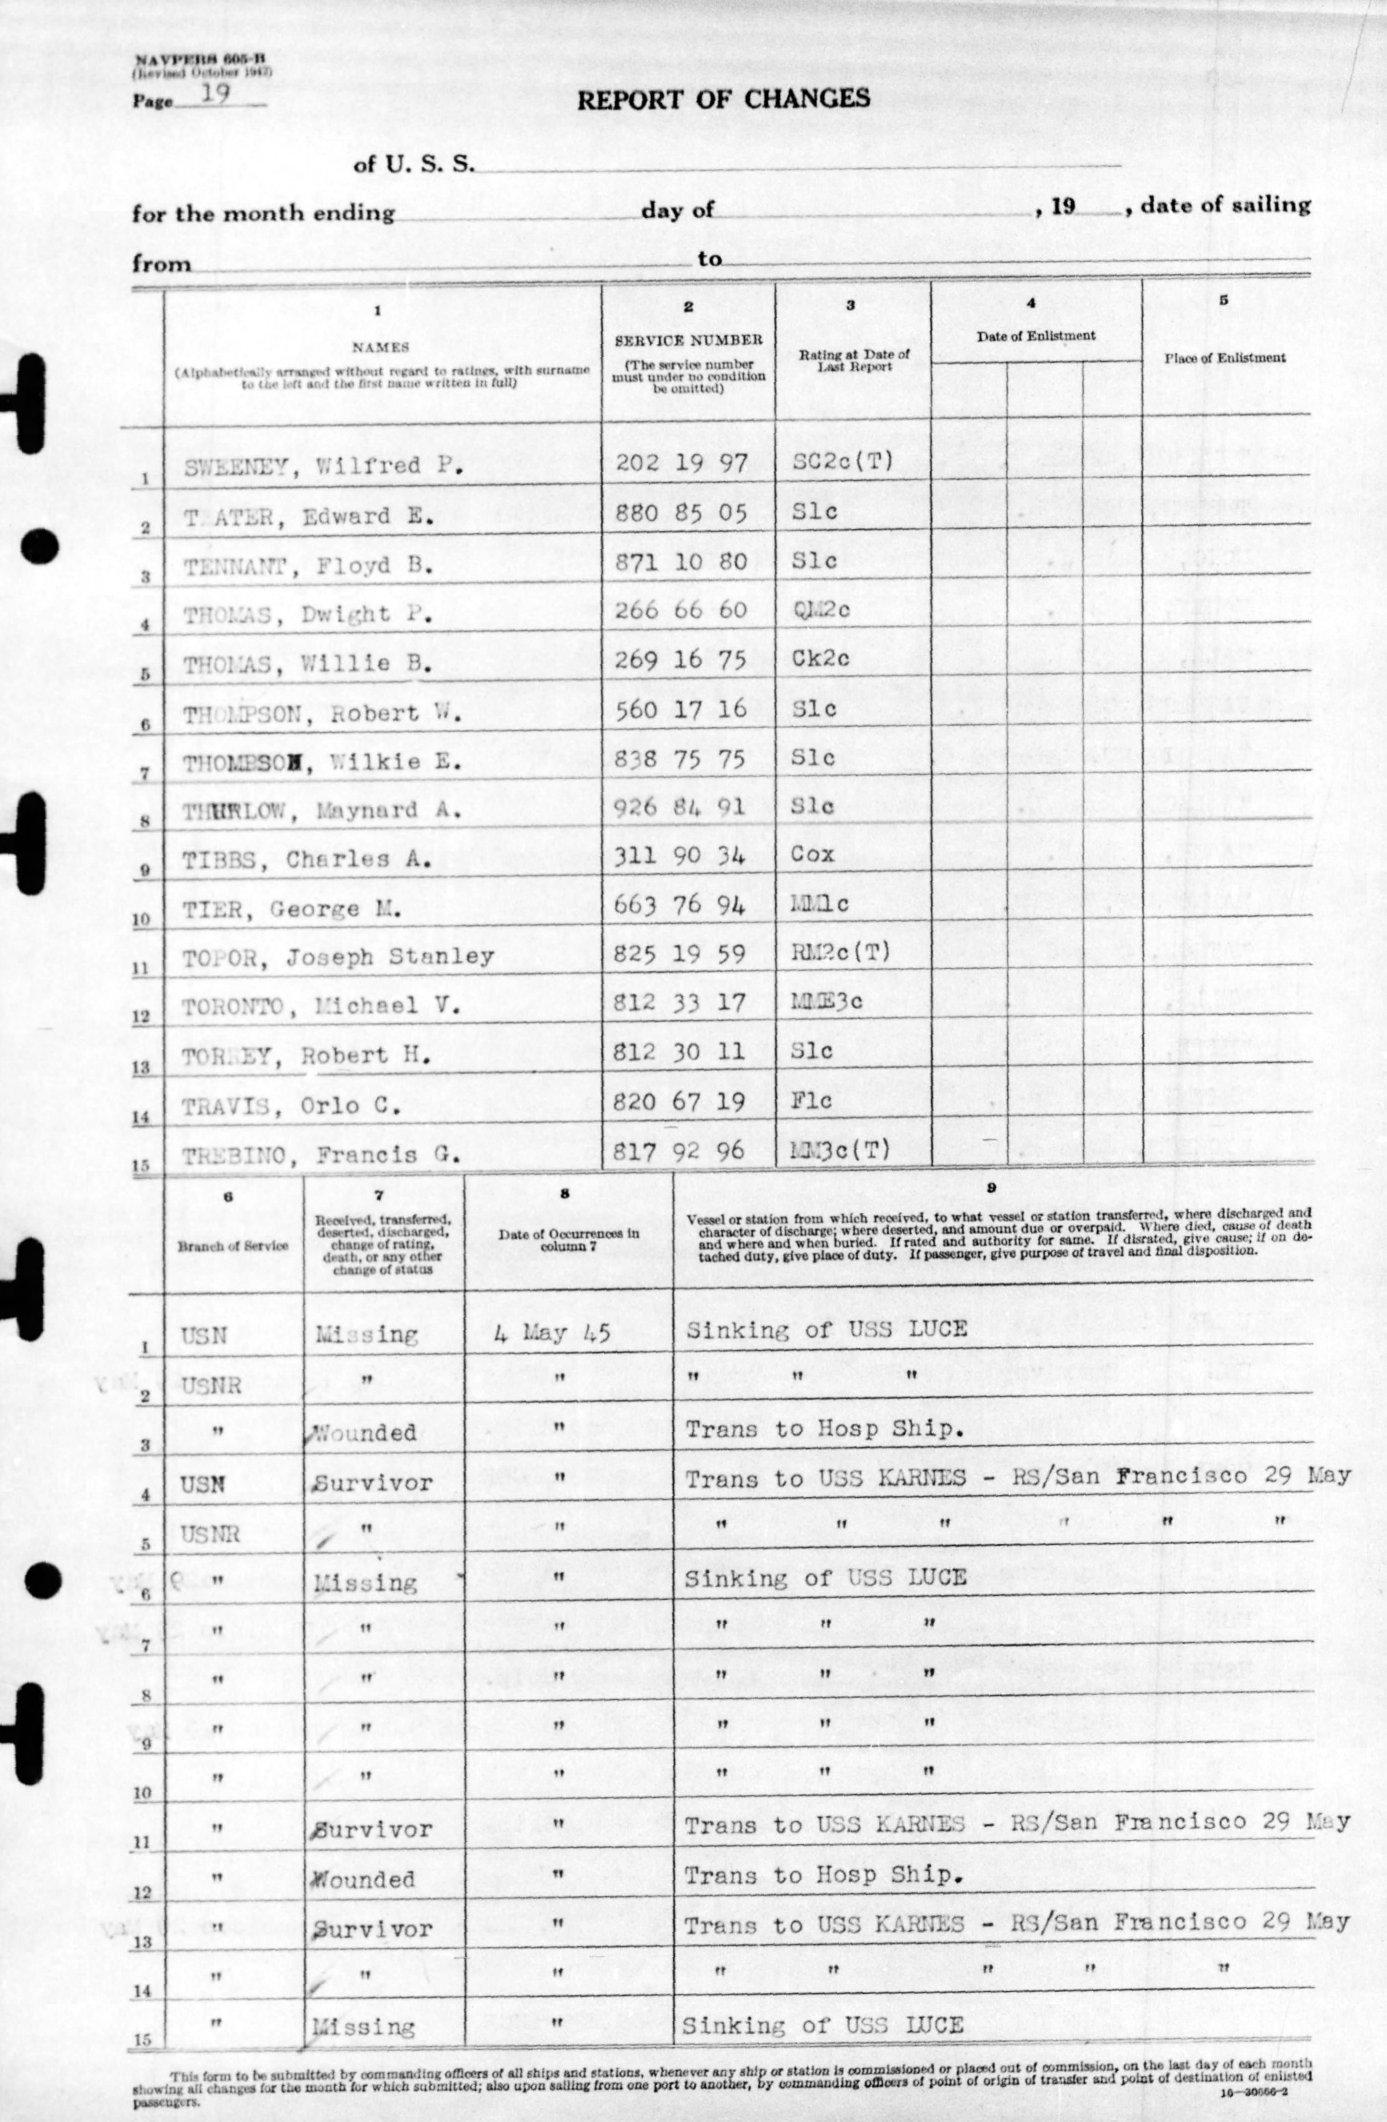 USS Luce final muster list dated June 19, 1945 after the ship was sunk May 4, 1945. Page 21 of 25.